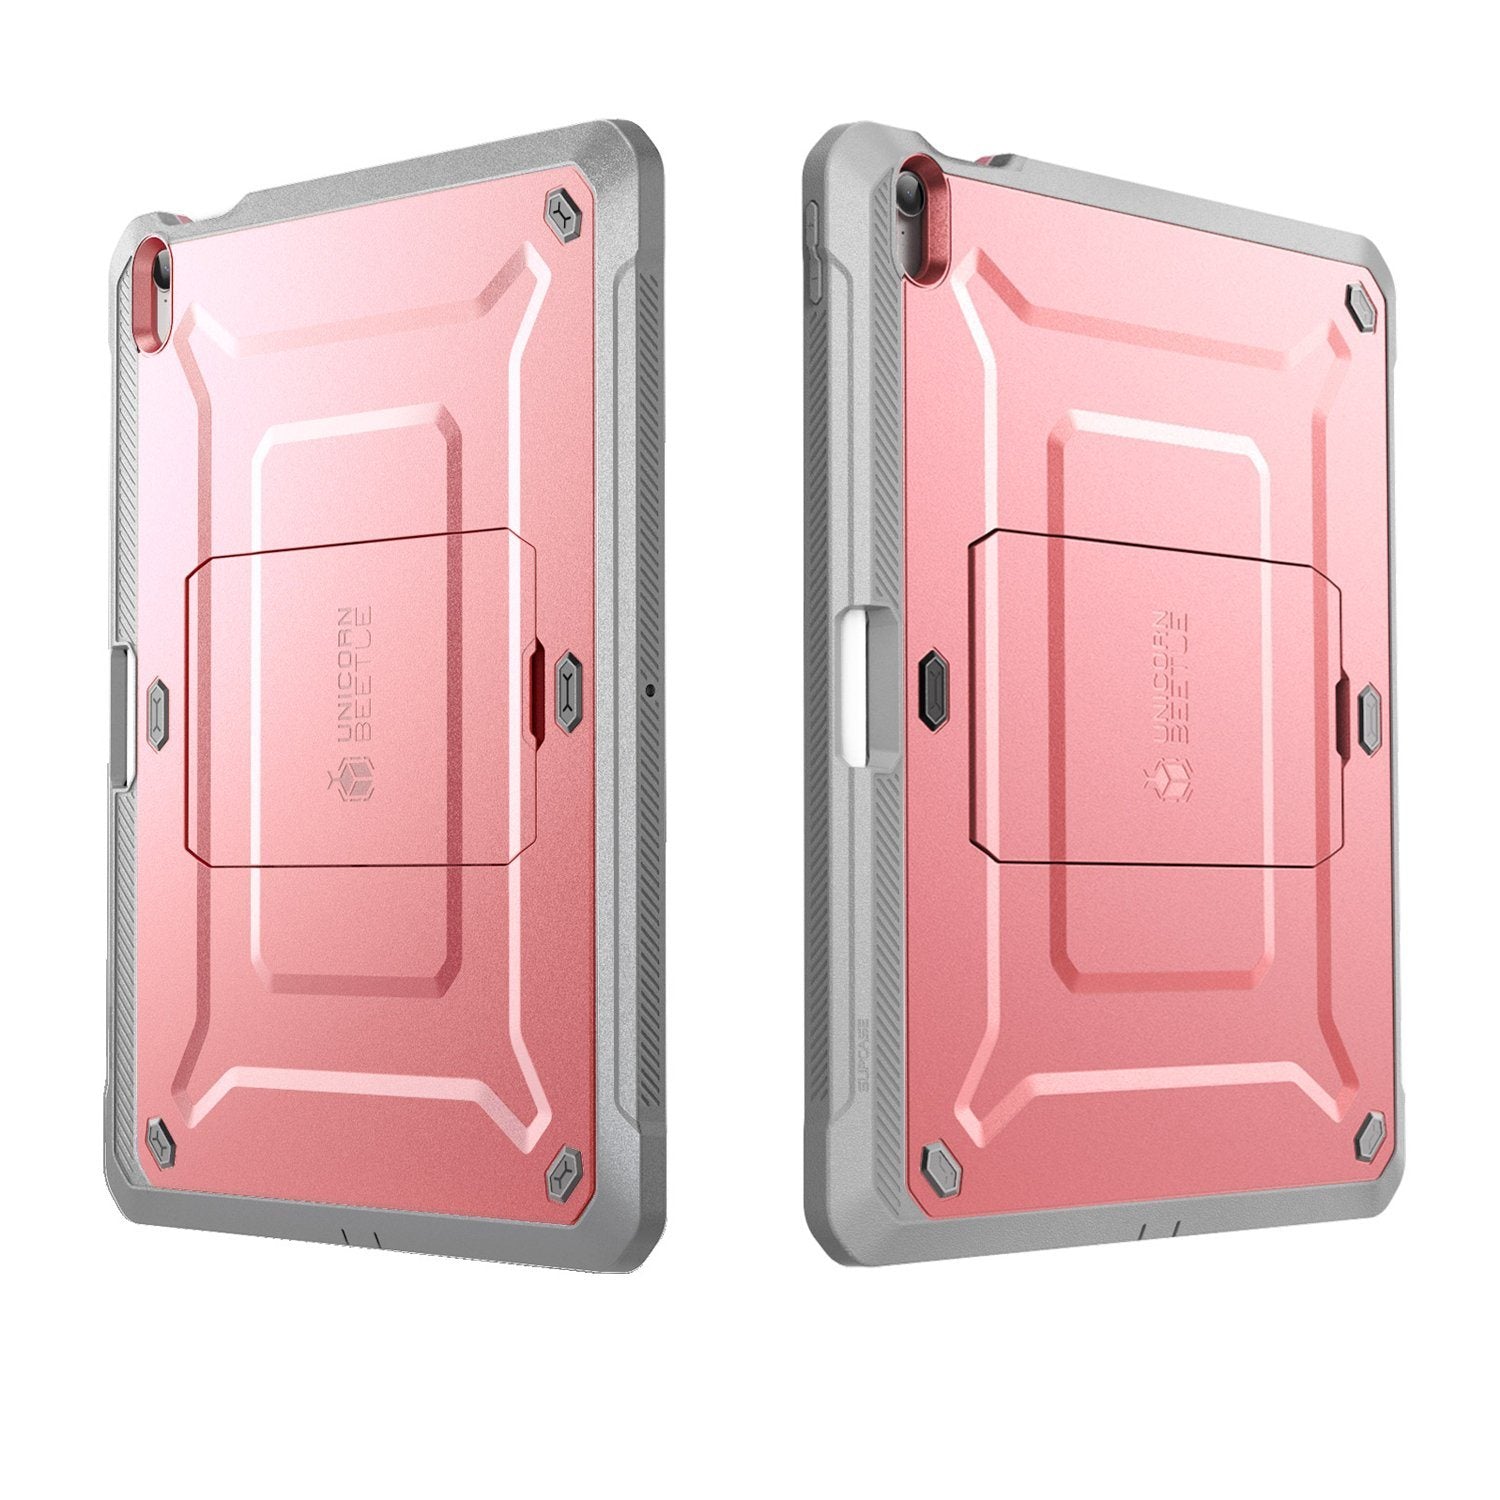 Supcase Unicorn Beetle Pro Series Full-Body Rugged Case with Kickstand for iPad Air 4 & iPad Air 5 Generation 10.9"(2020)